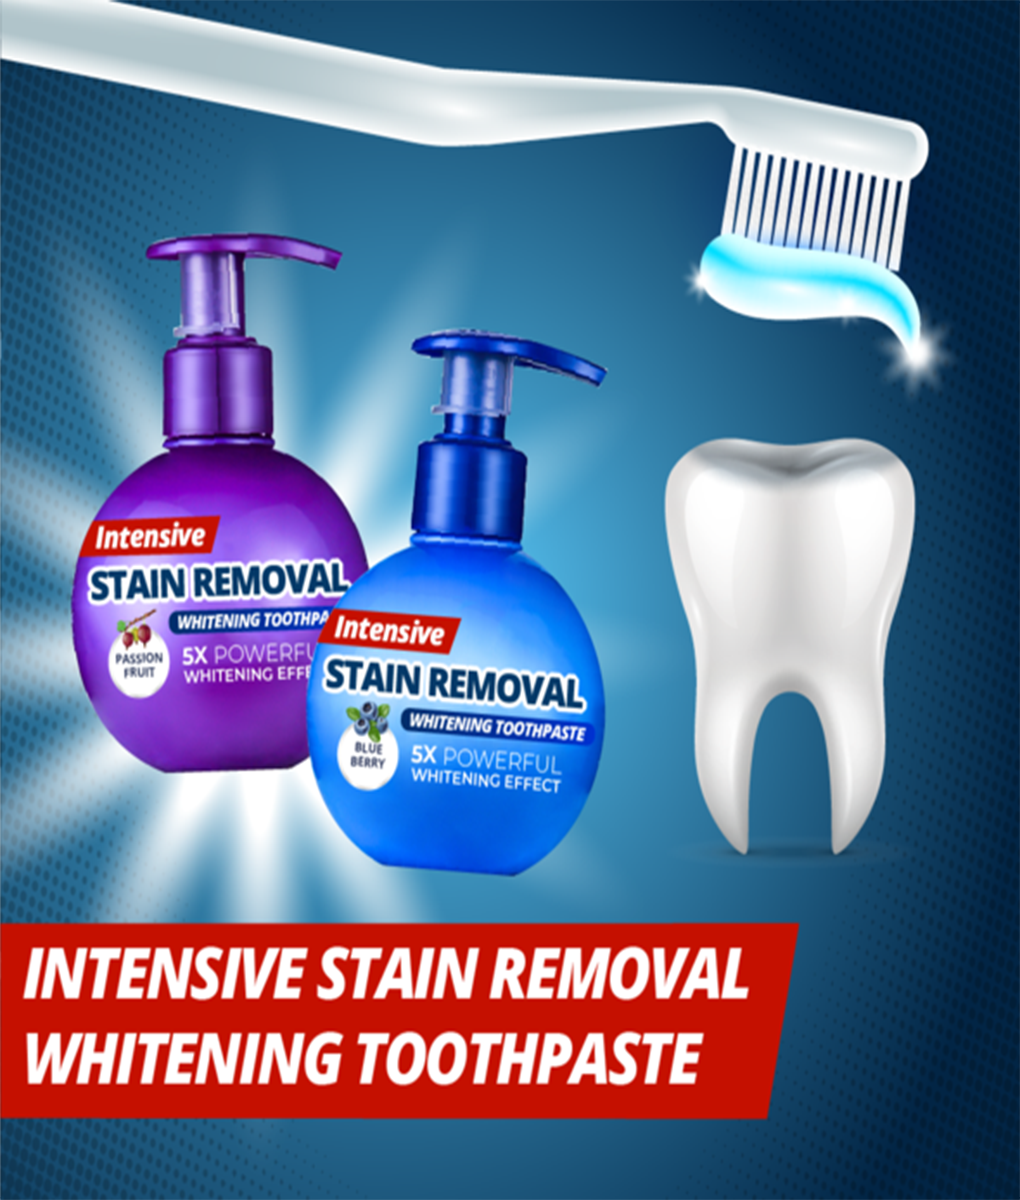 Stain removal toothpaste richter straps